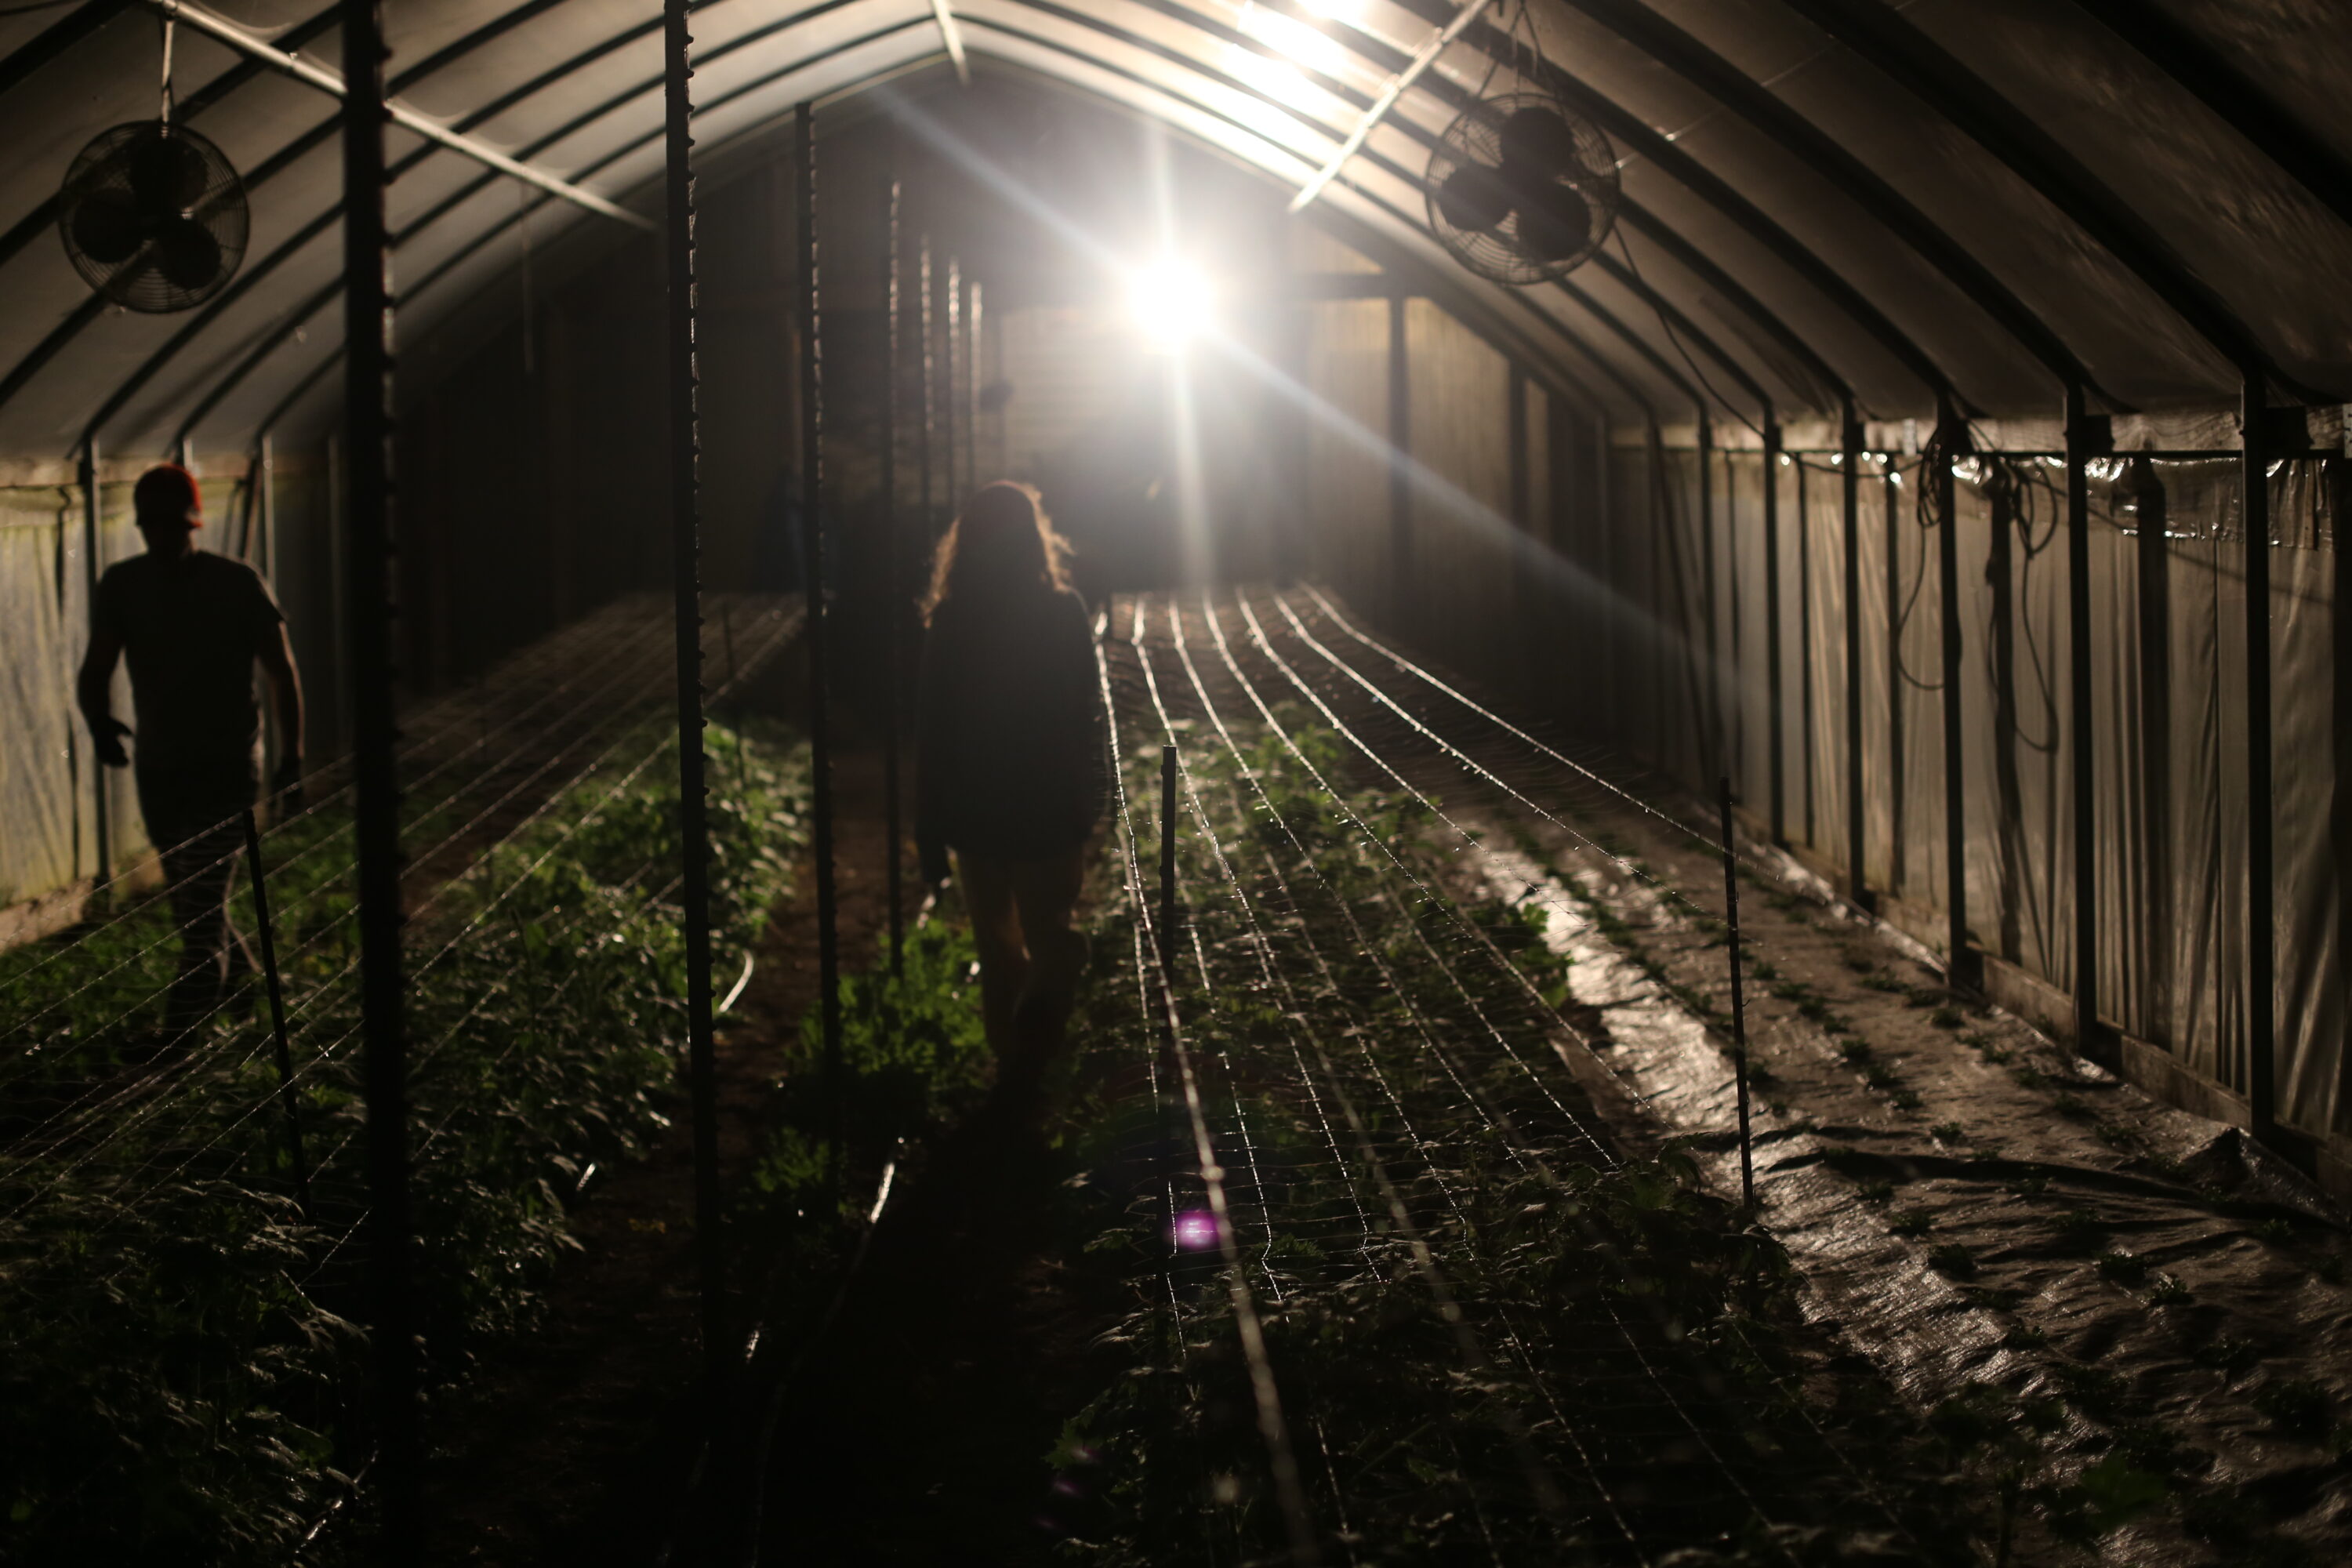 Two people in a greenhouse at night